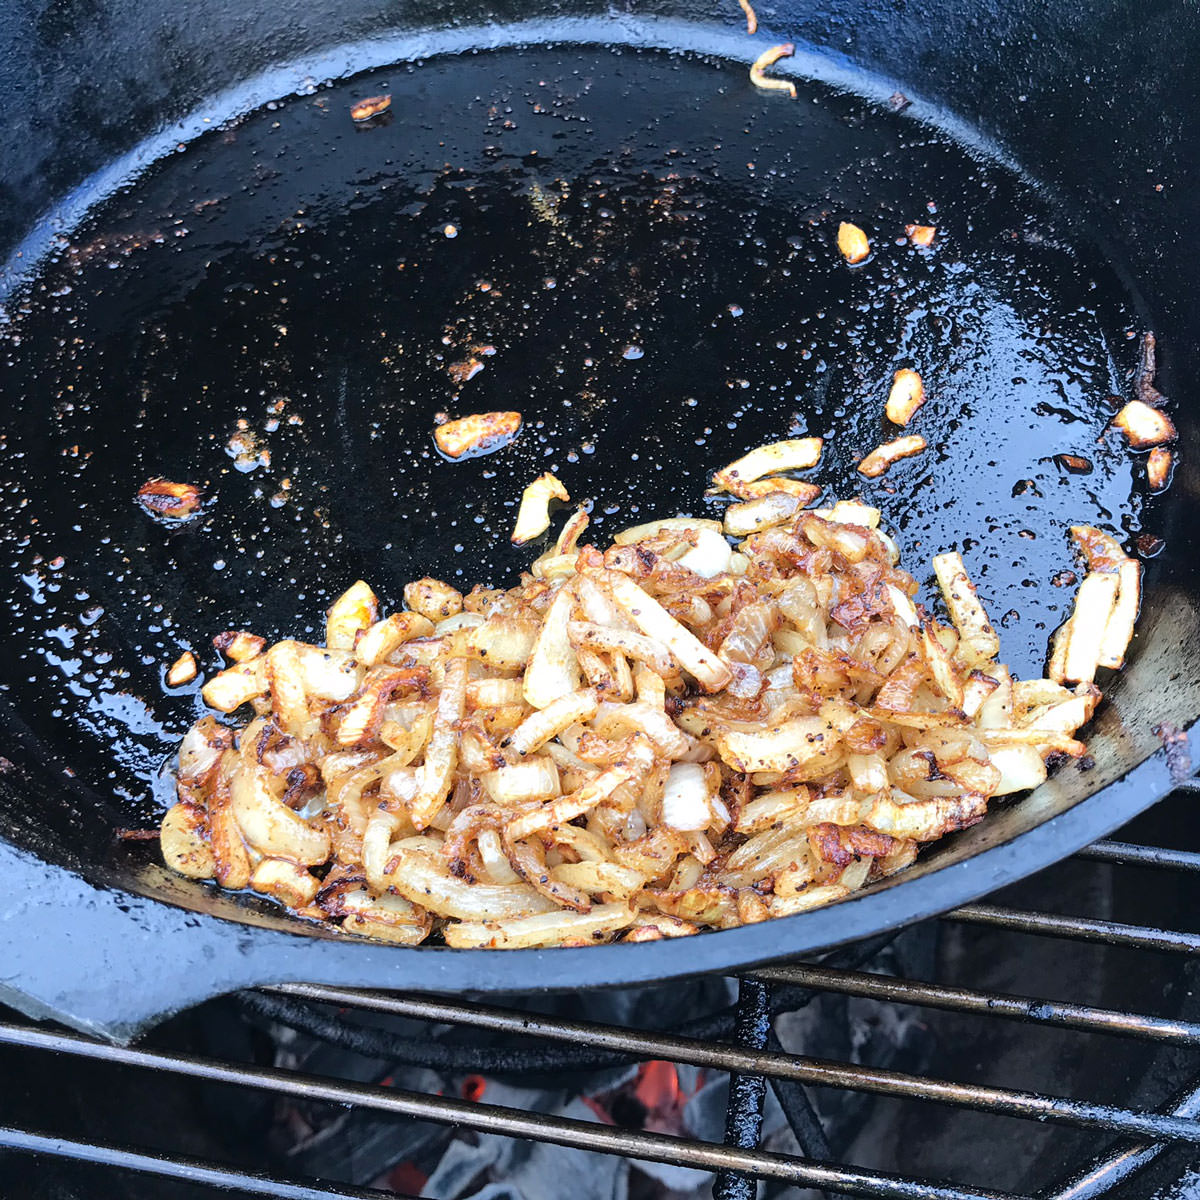 Cook onions gently until golden brown and caramelized